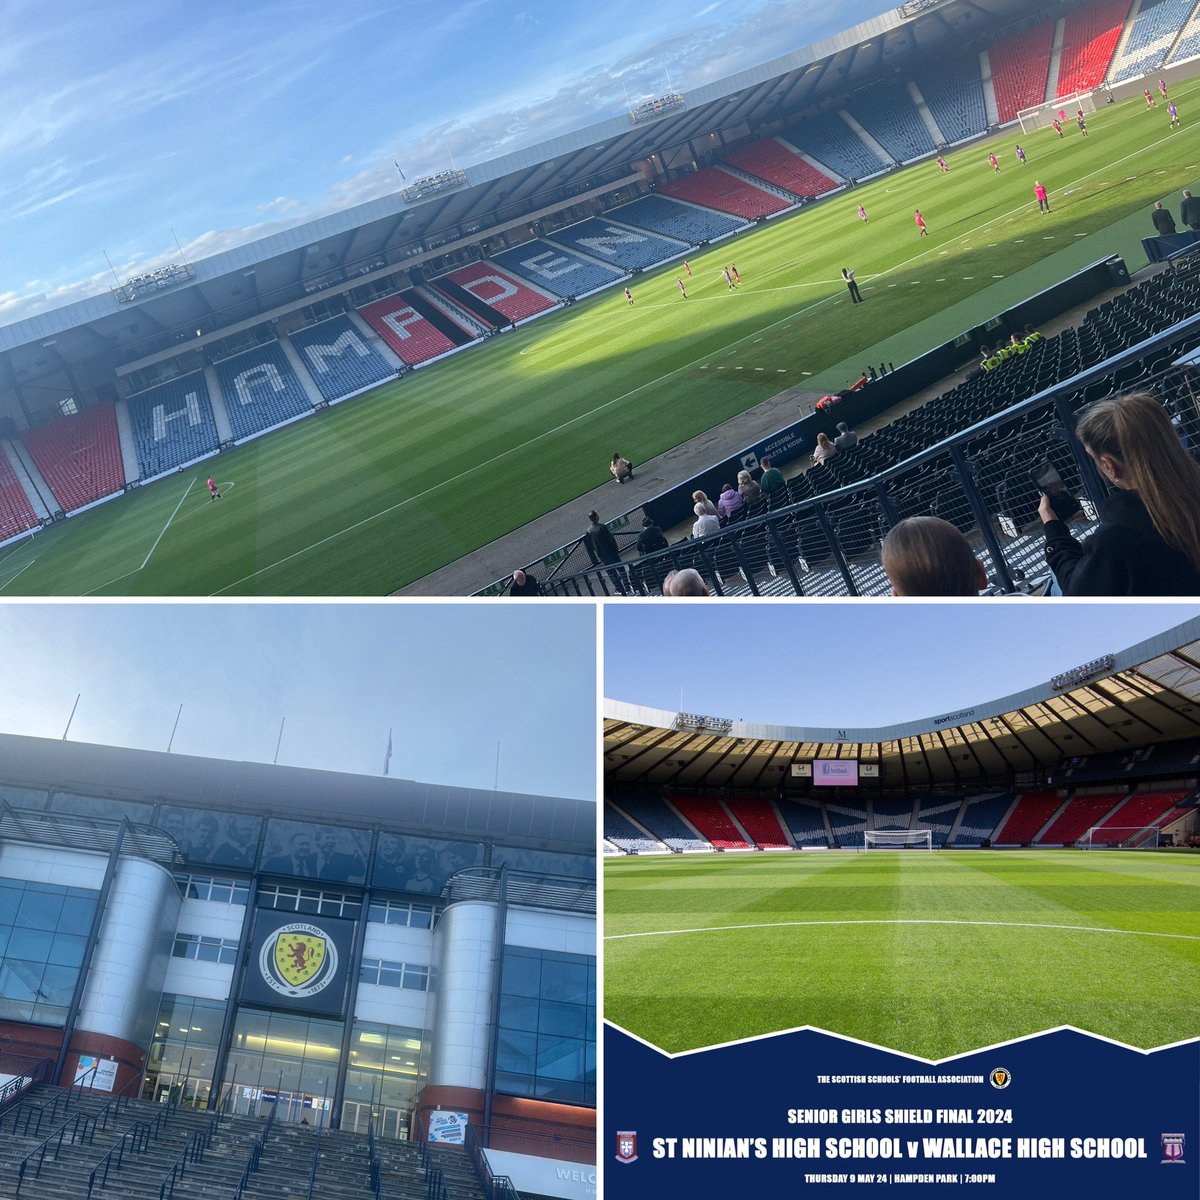 Great night at @HampdenPark for the @sschoolsfa Senior Shield between @stninianshigh & @wallacehighsch ⚽️ An unbelievable experience for all the Girls playing at our National Stadium 🙌🏻 The Girls should be very proud of themselves, fantastic efforts on that huge park👏🏻 ❤️⚽️